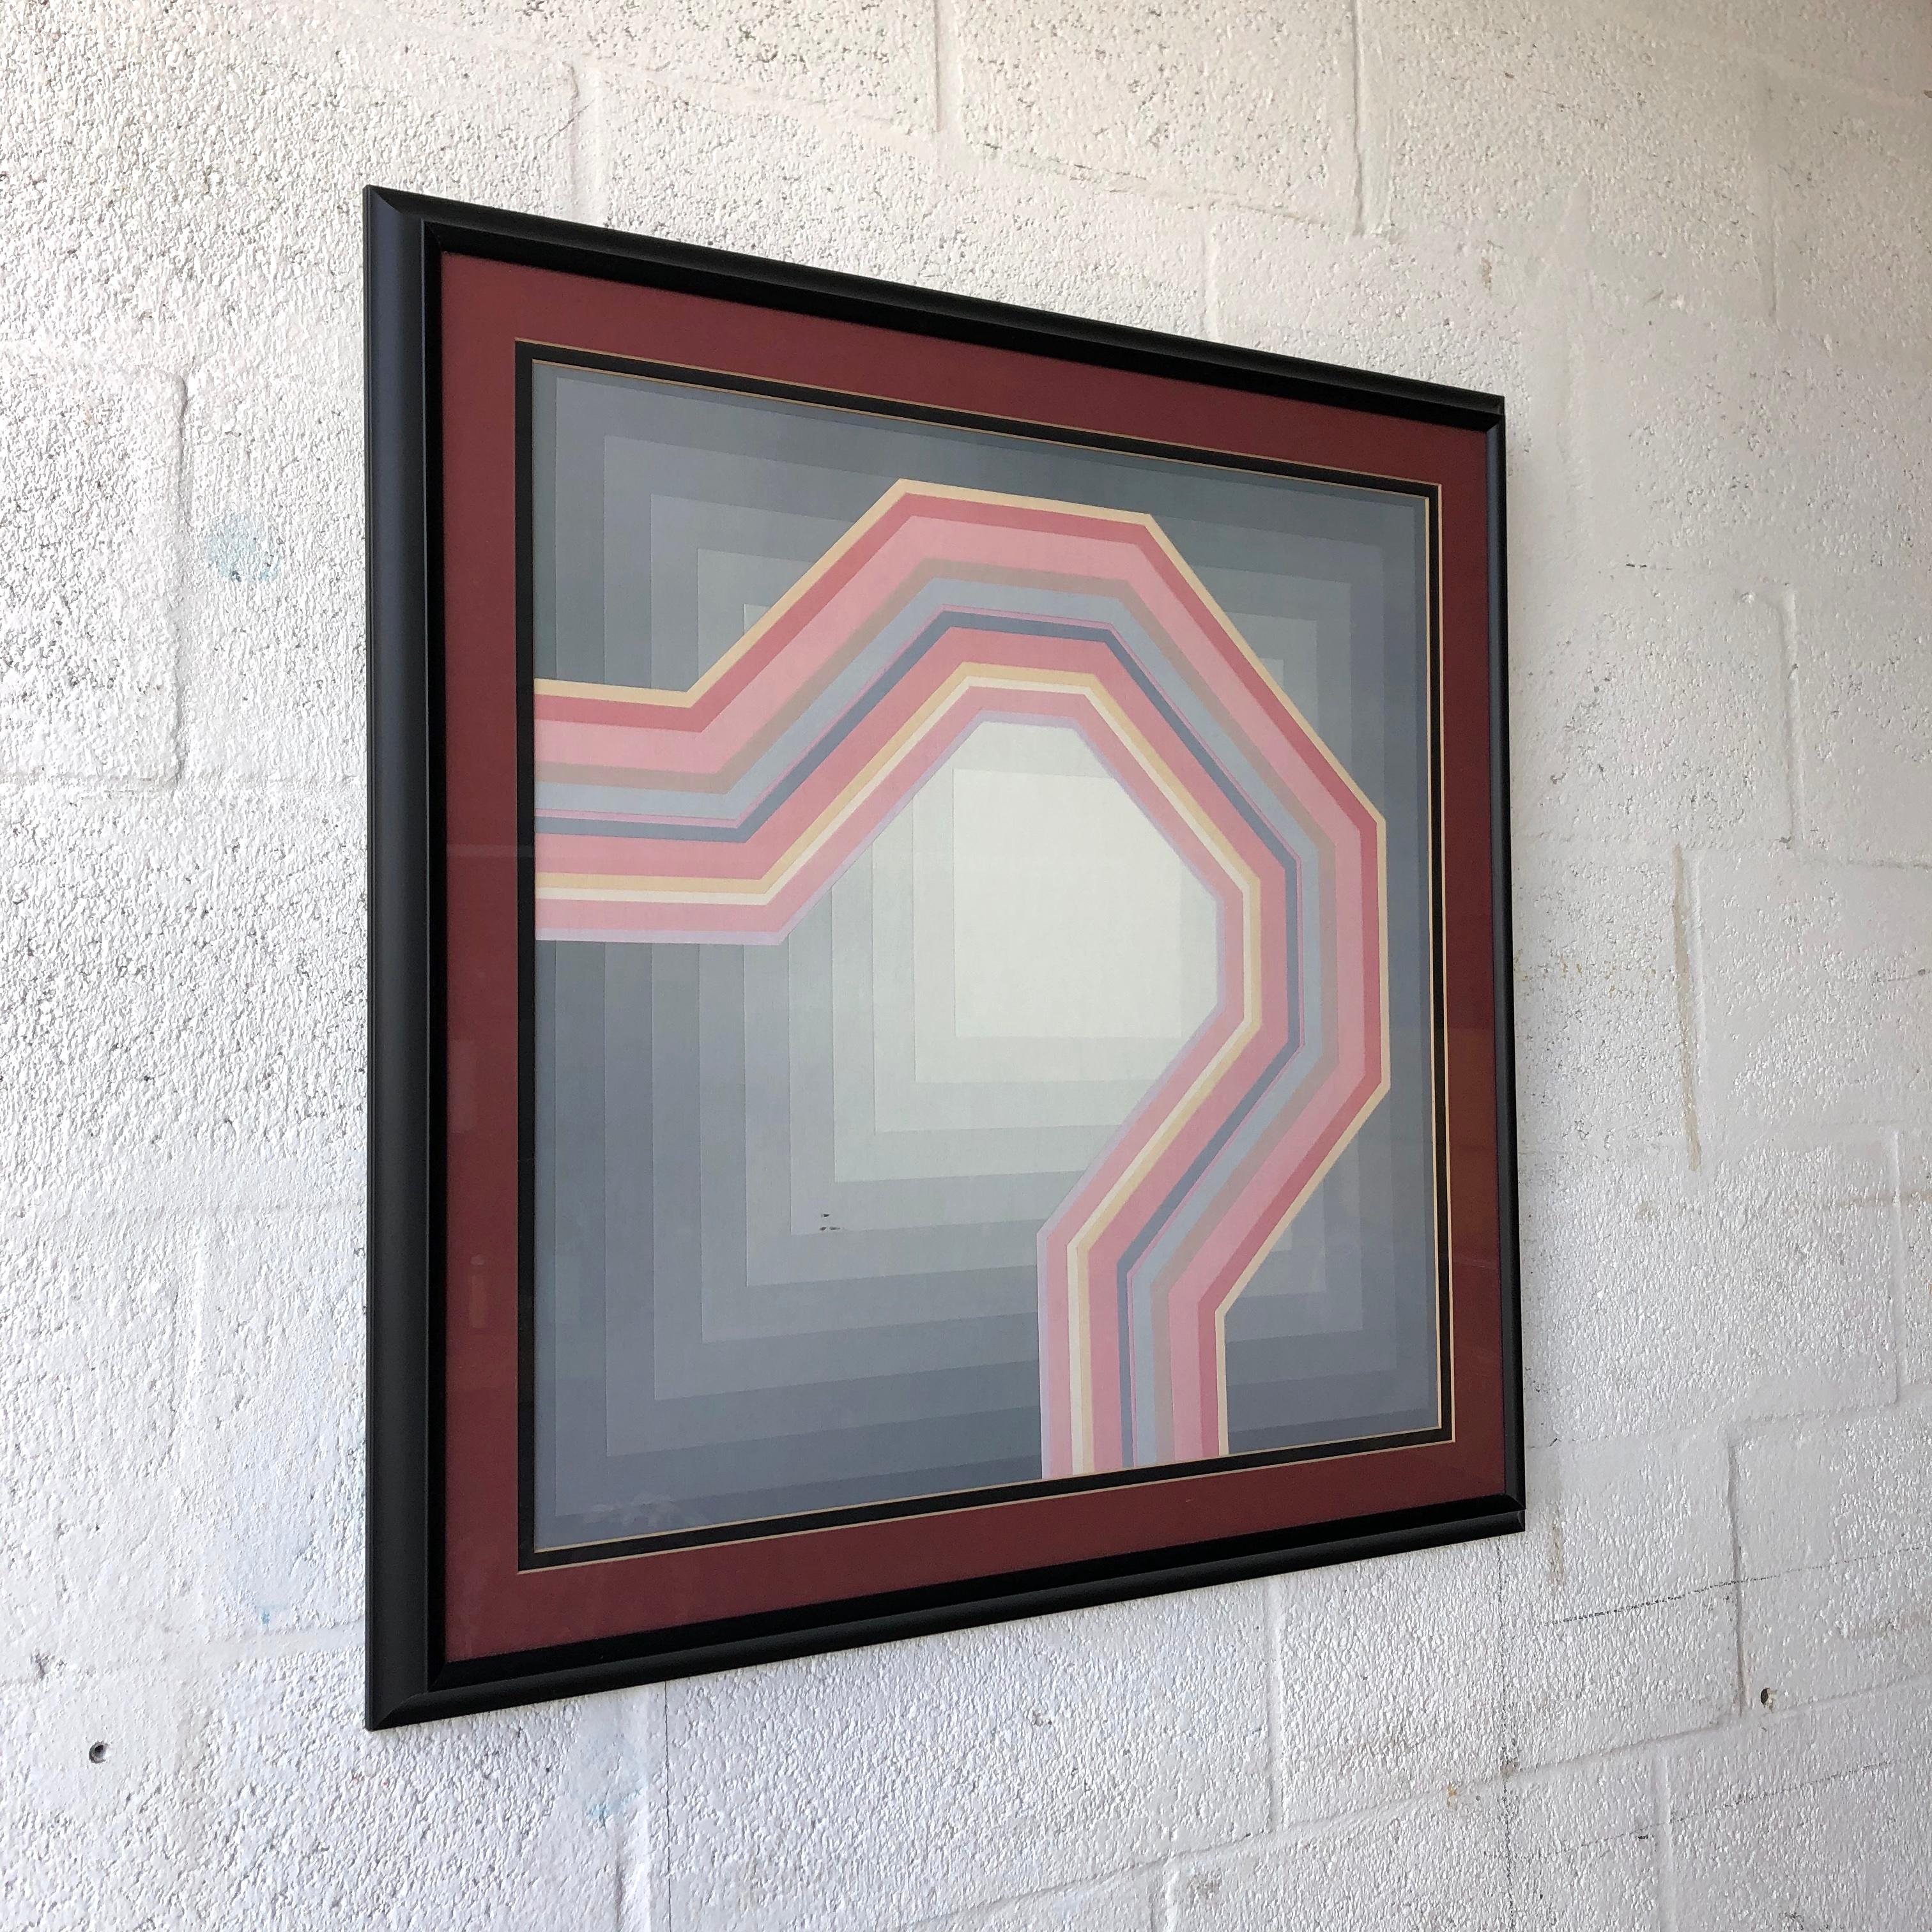 Framed Geometric Op Art Lithograph in the Richard Anuszkiewicz's Style . Circa 1980s
Features a geometric figure that successfully combines the 1980s Pastel Colors with Abstract Minimalism and Postmodern Optical Art. 
Professionally Framed with a